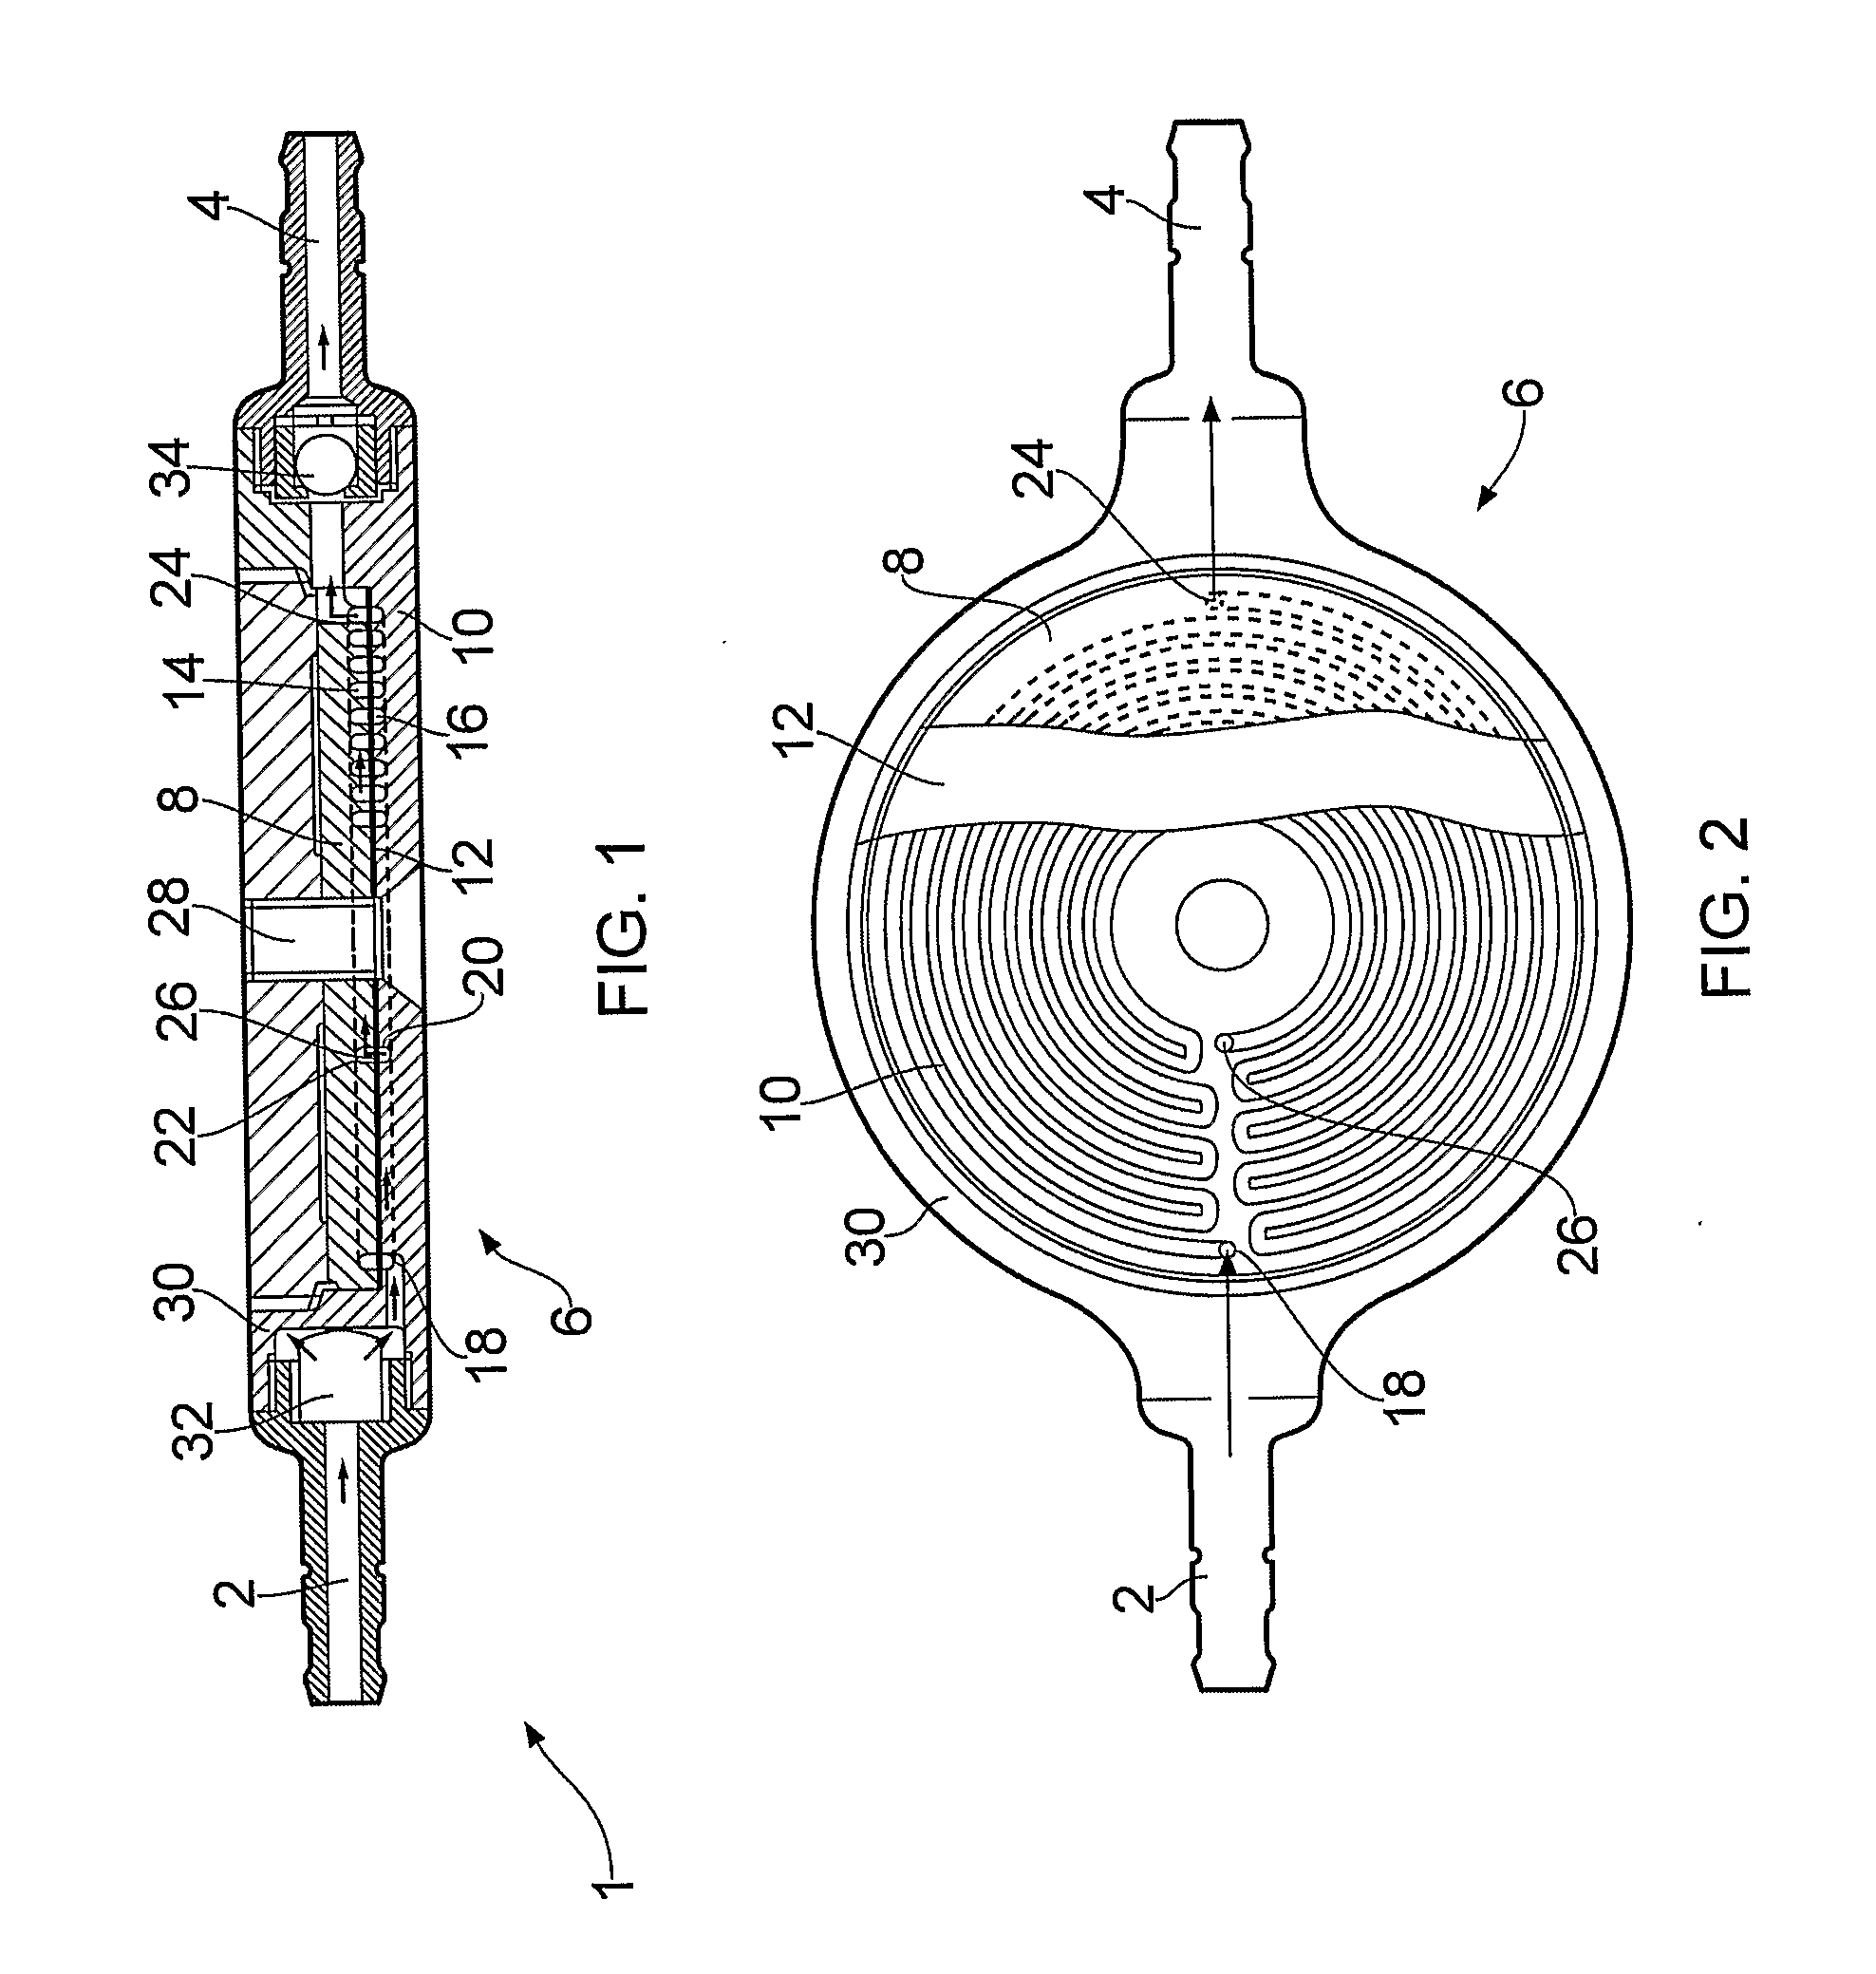 Device for Controlling the Rate of Flow of a Fluid